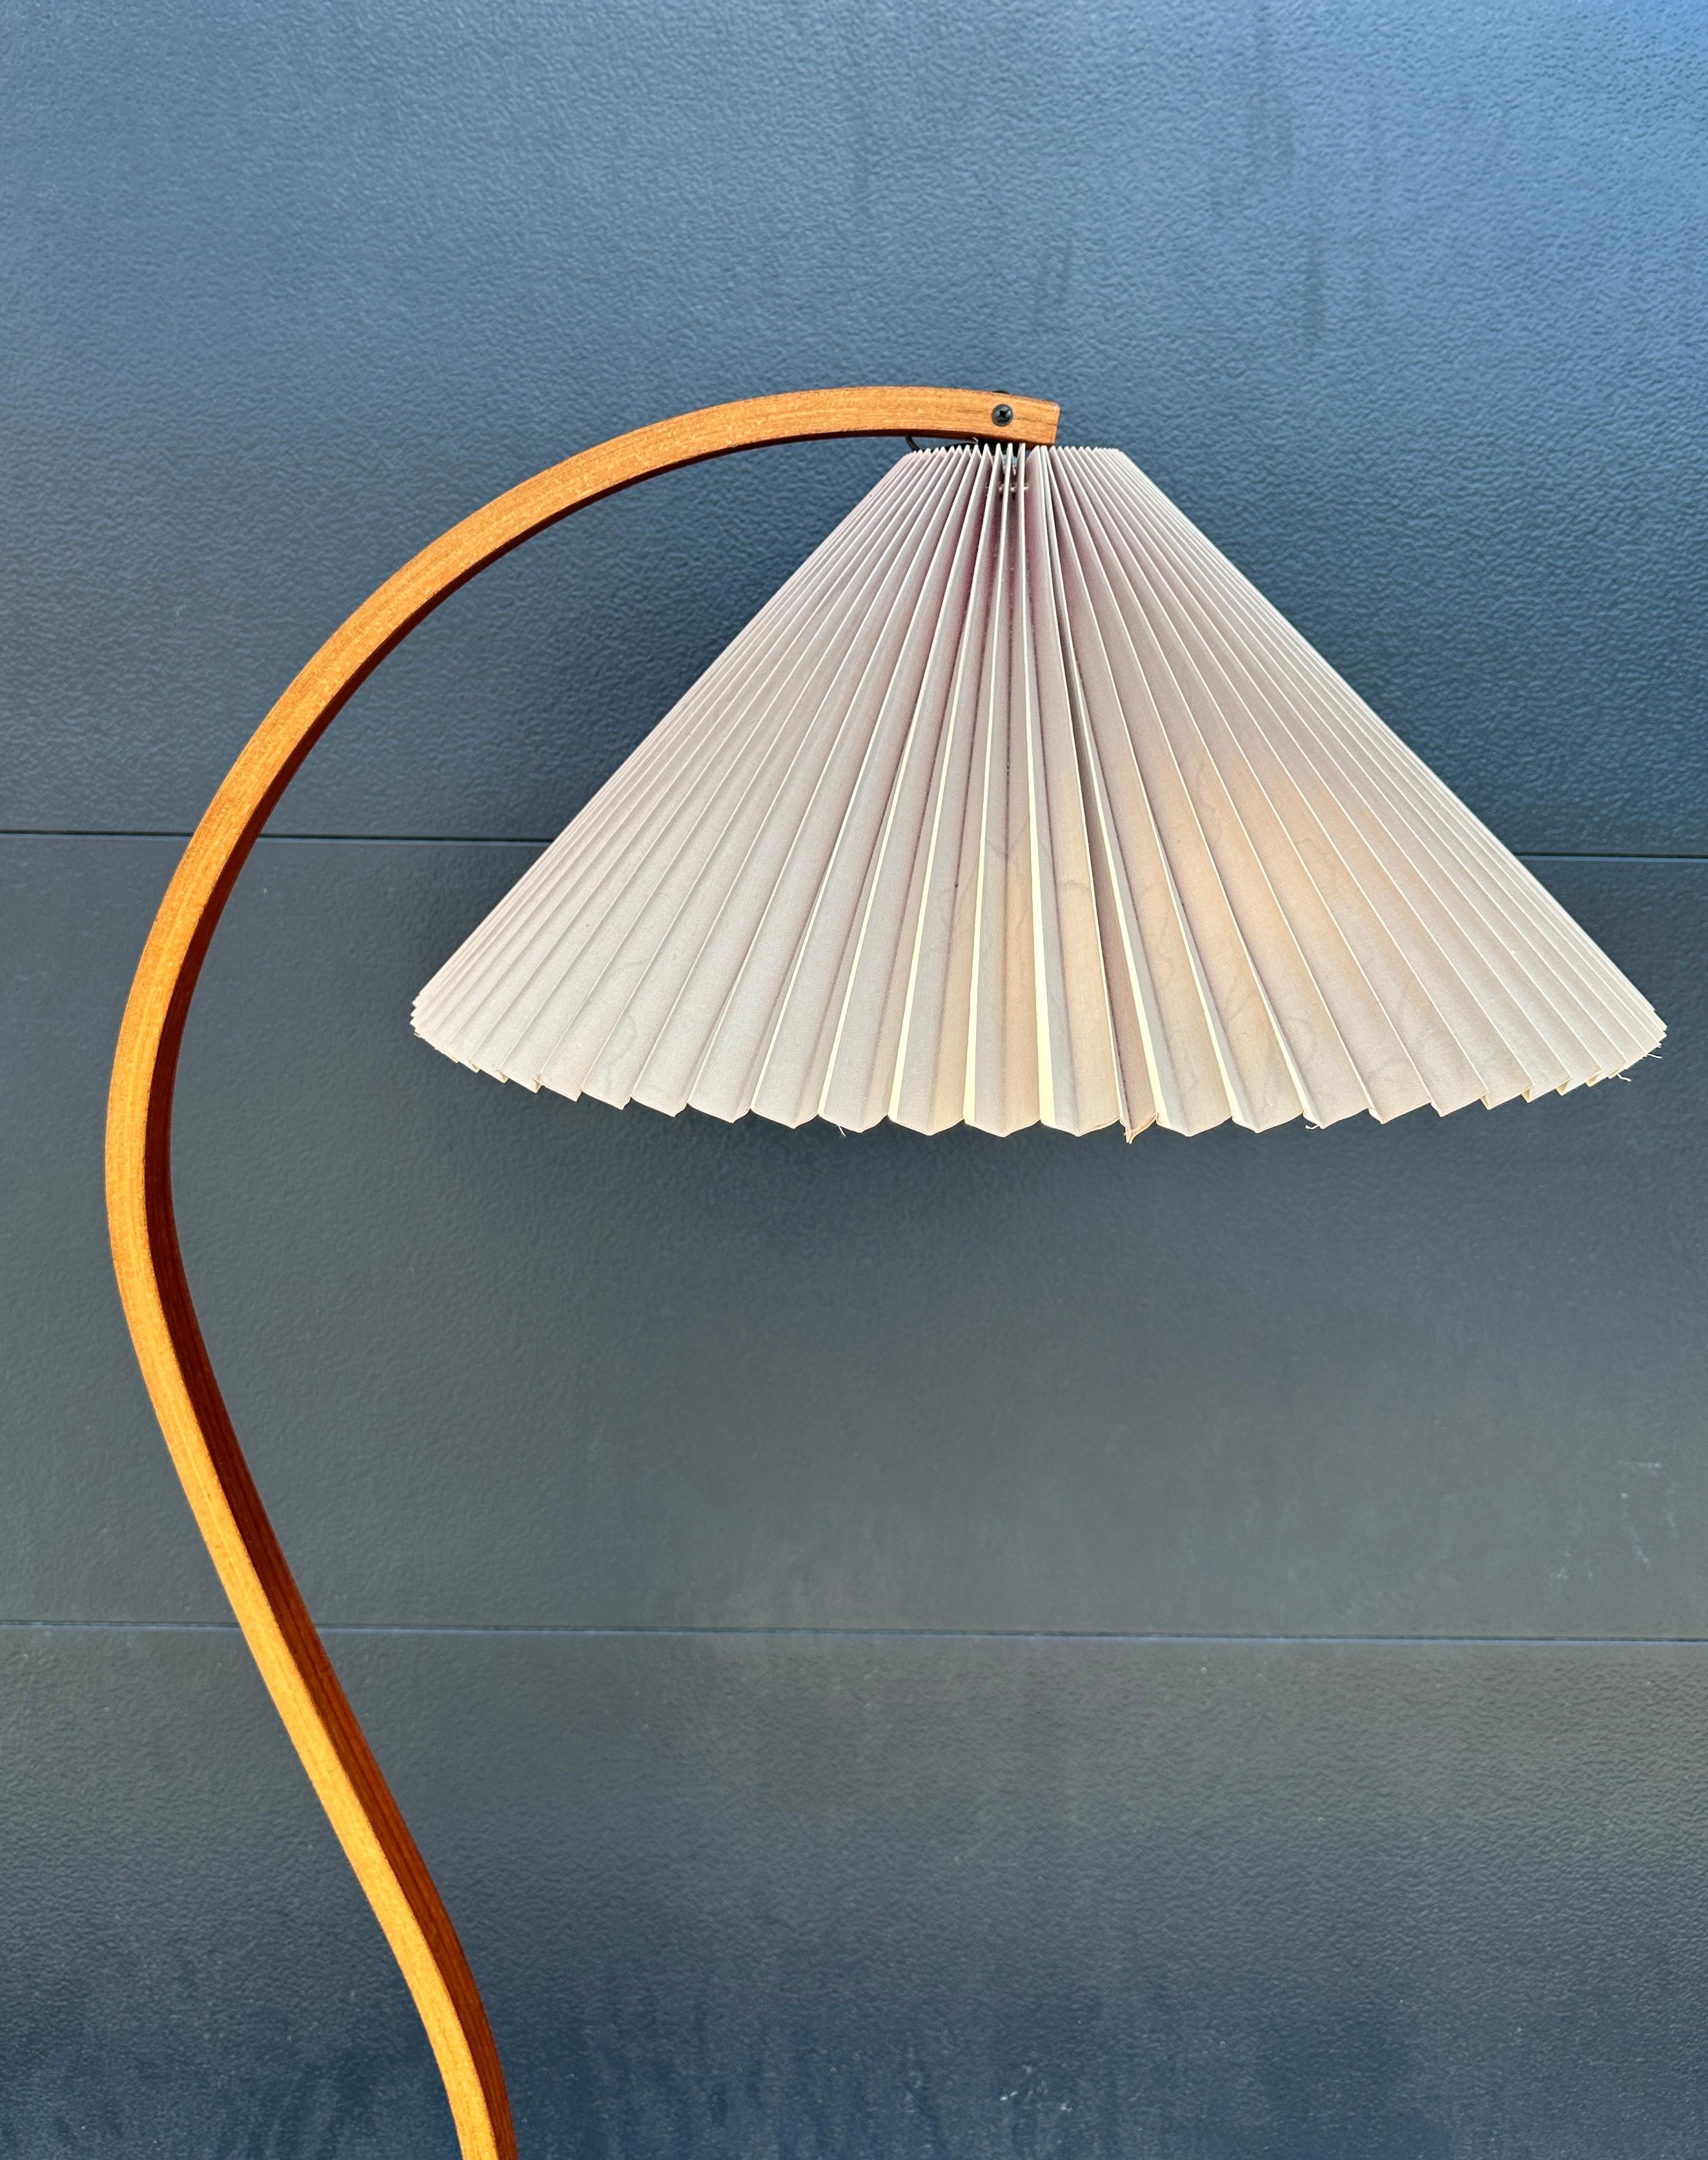 Original Caprani bentwood floor lamp, circa. 1970. This vintage lamp features sculptural bent plywood stand with a curve, a cast iron crescent shaped base, and a pleated linen shade. Original switch and wiring in very good working condition. Cast